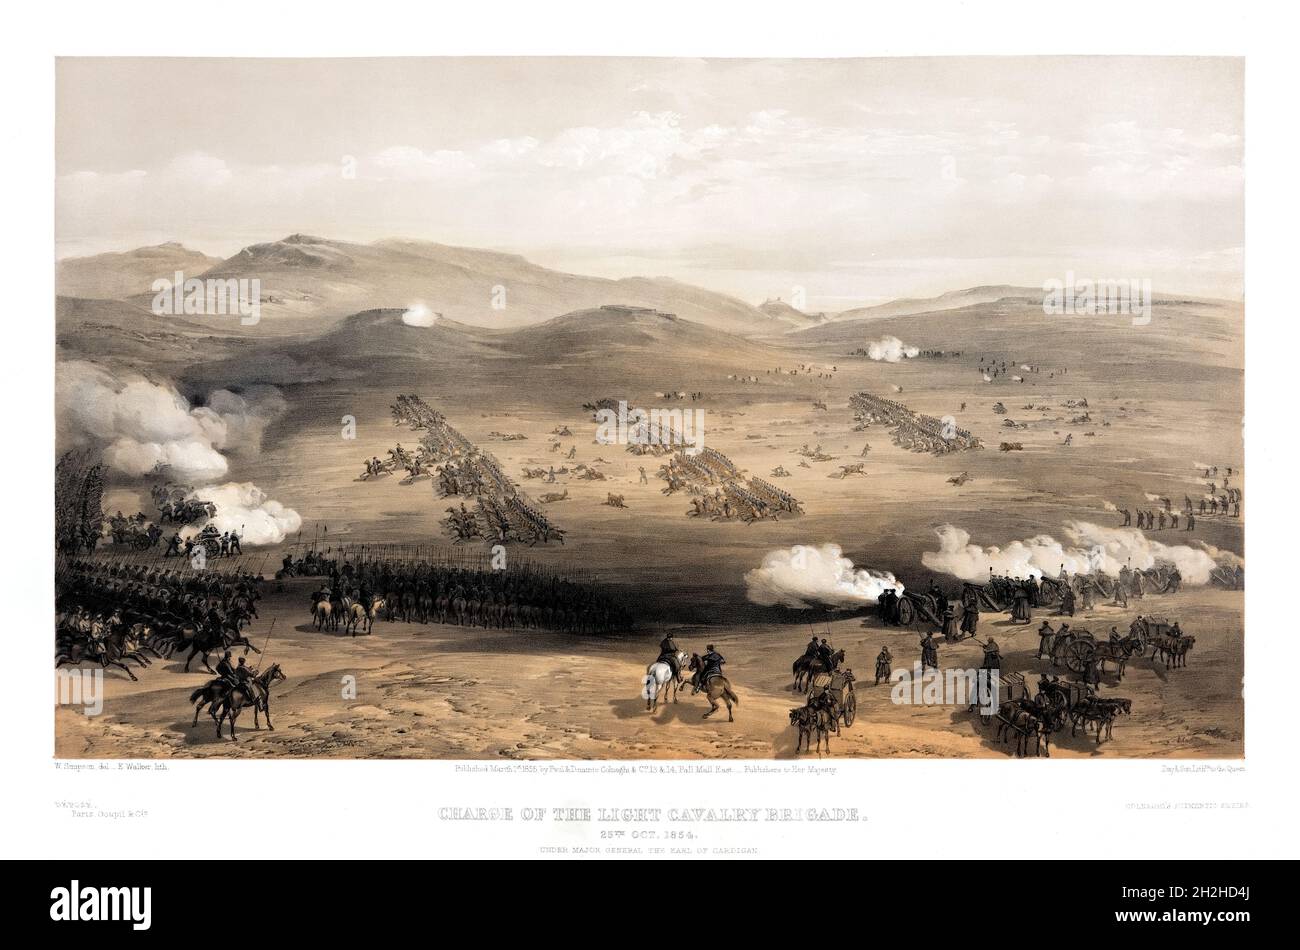 Charge of the light cavalry brigade, 25th Oct. 1854, under Major General the Earl of Cardigan by William Simpson Stock Photo